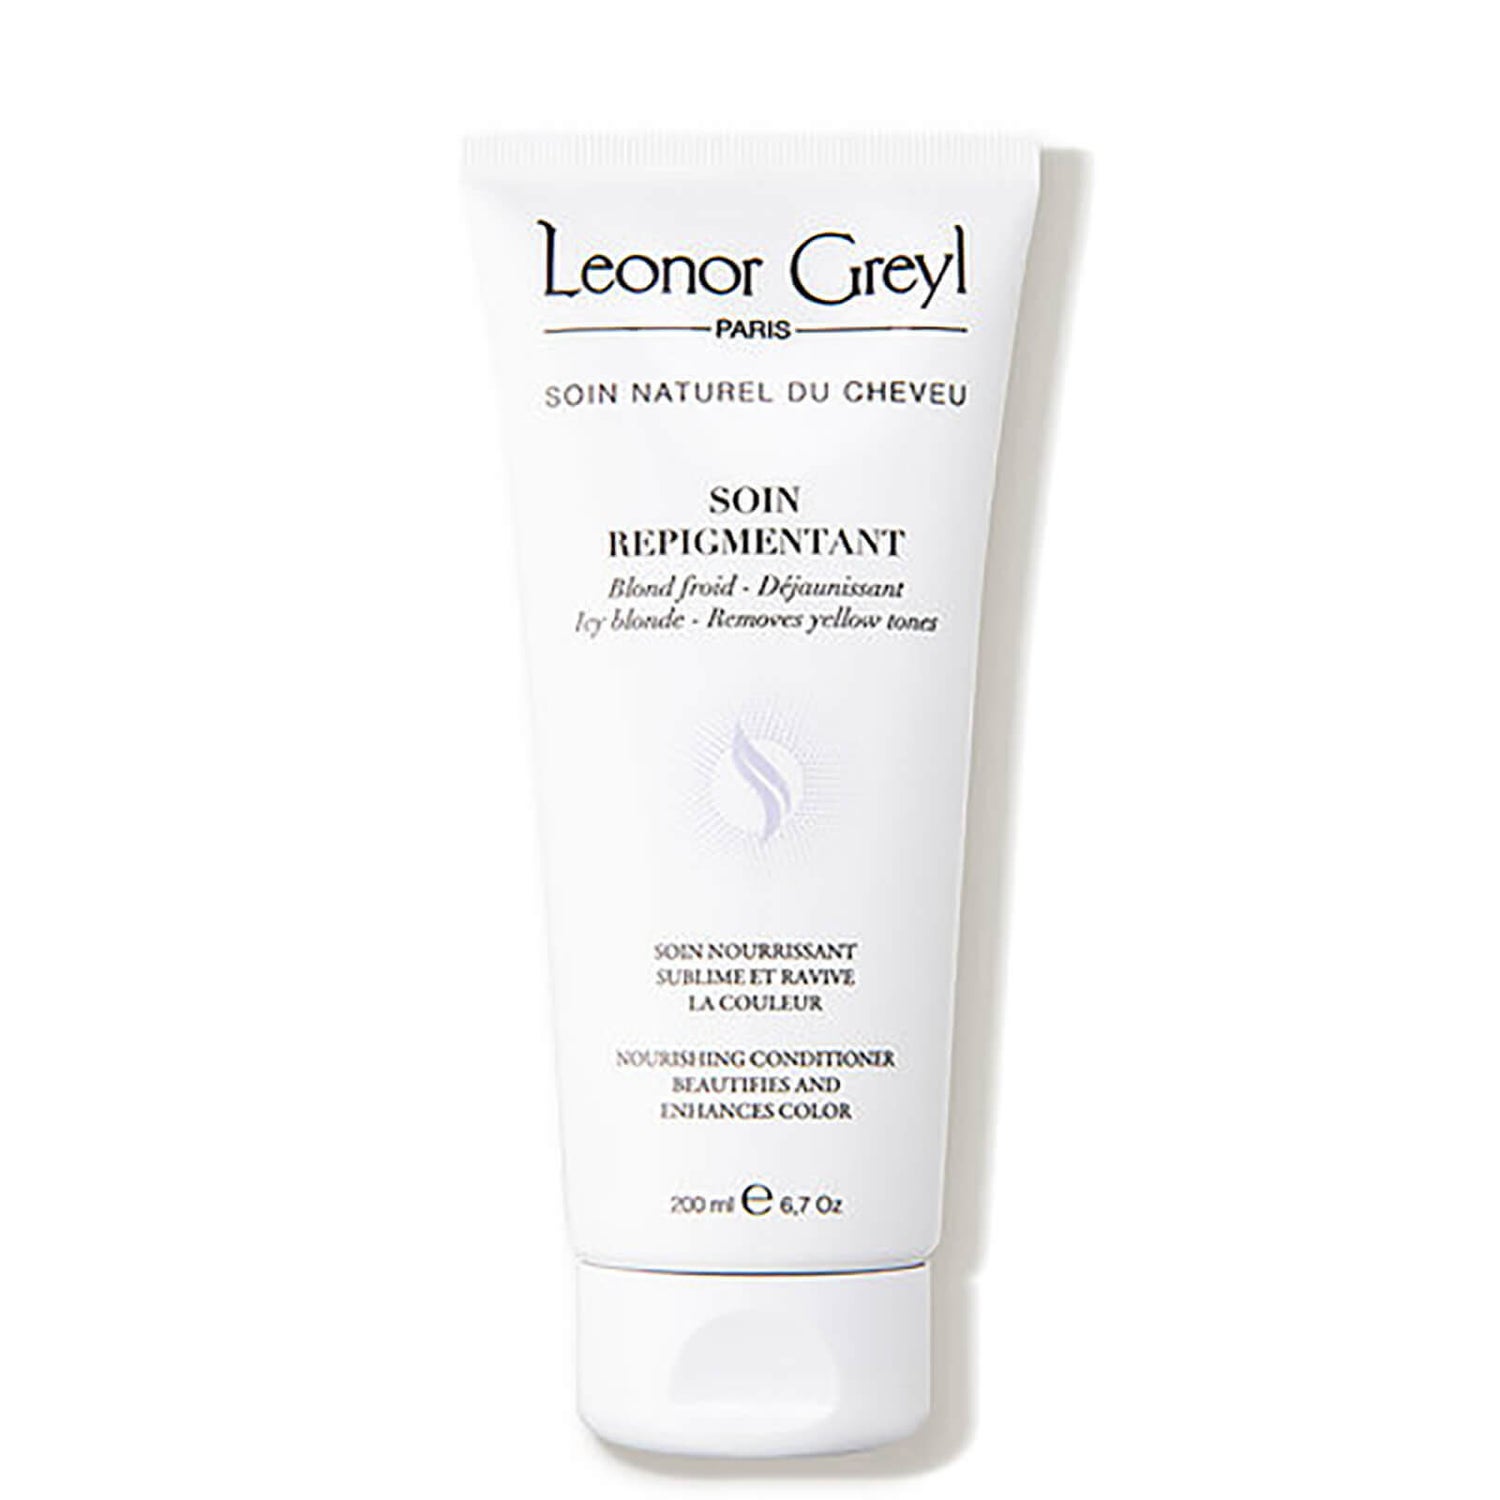 Leonor Greyl Soin Repigmentant Color-Enhancing and Nourishing Conditioner (6.7 oz.)